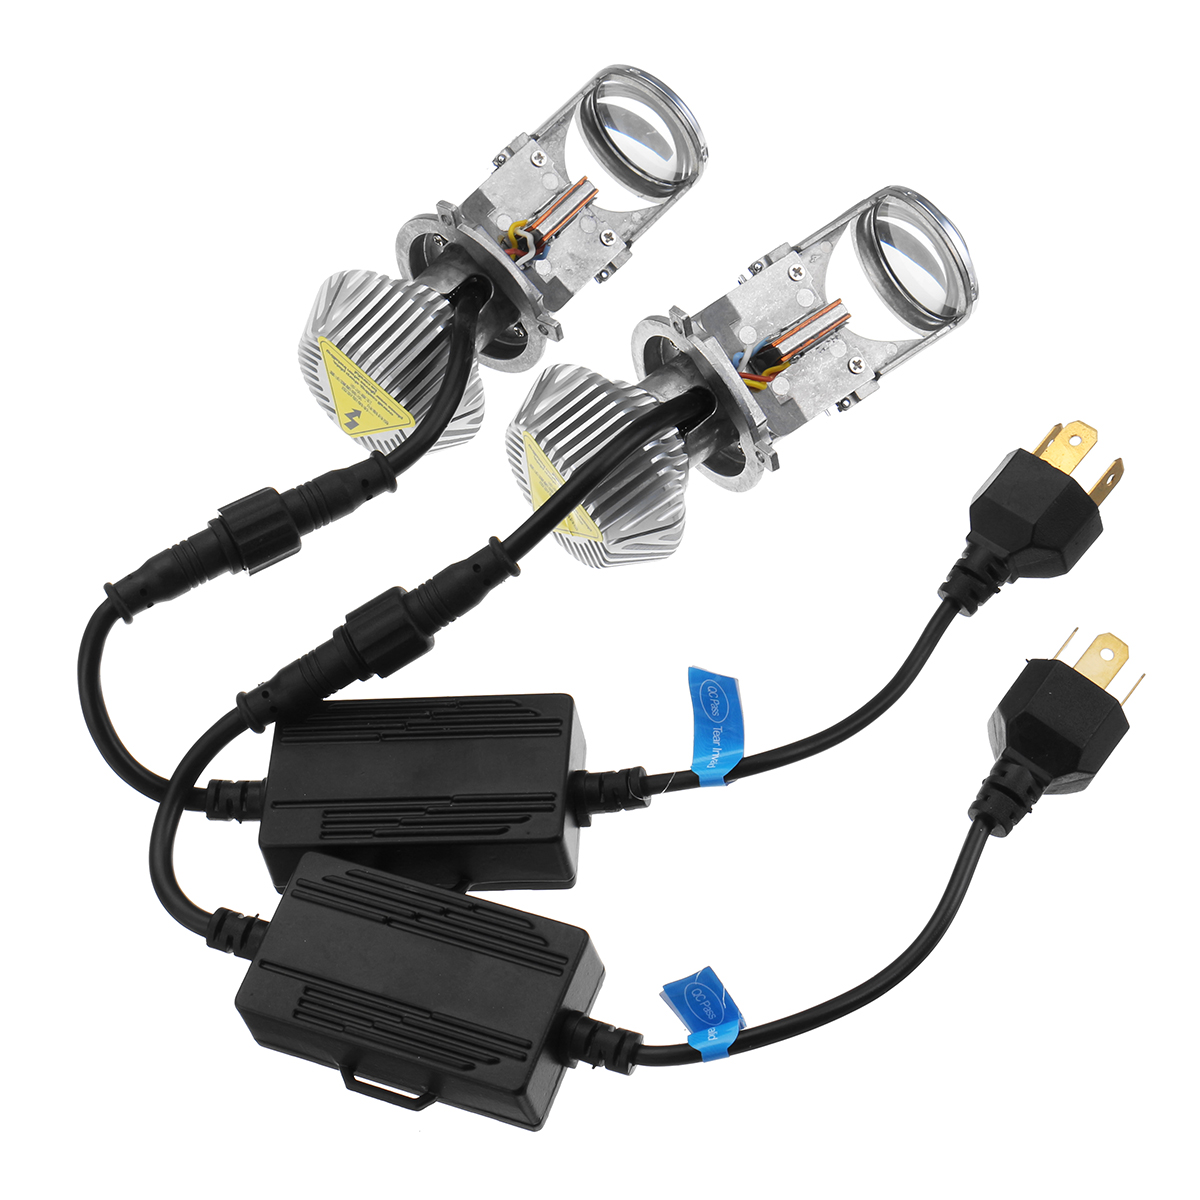 

G6 H4 Car LED Projector Headlights Bulb with Reflector Cup High Low Combo Beam IP65 Waterproof 70W 8000LM 5500K White 2P